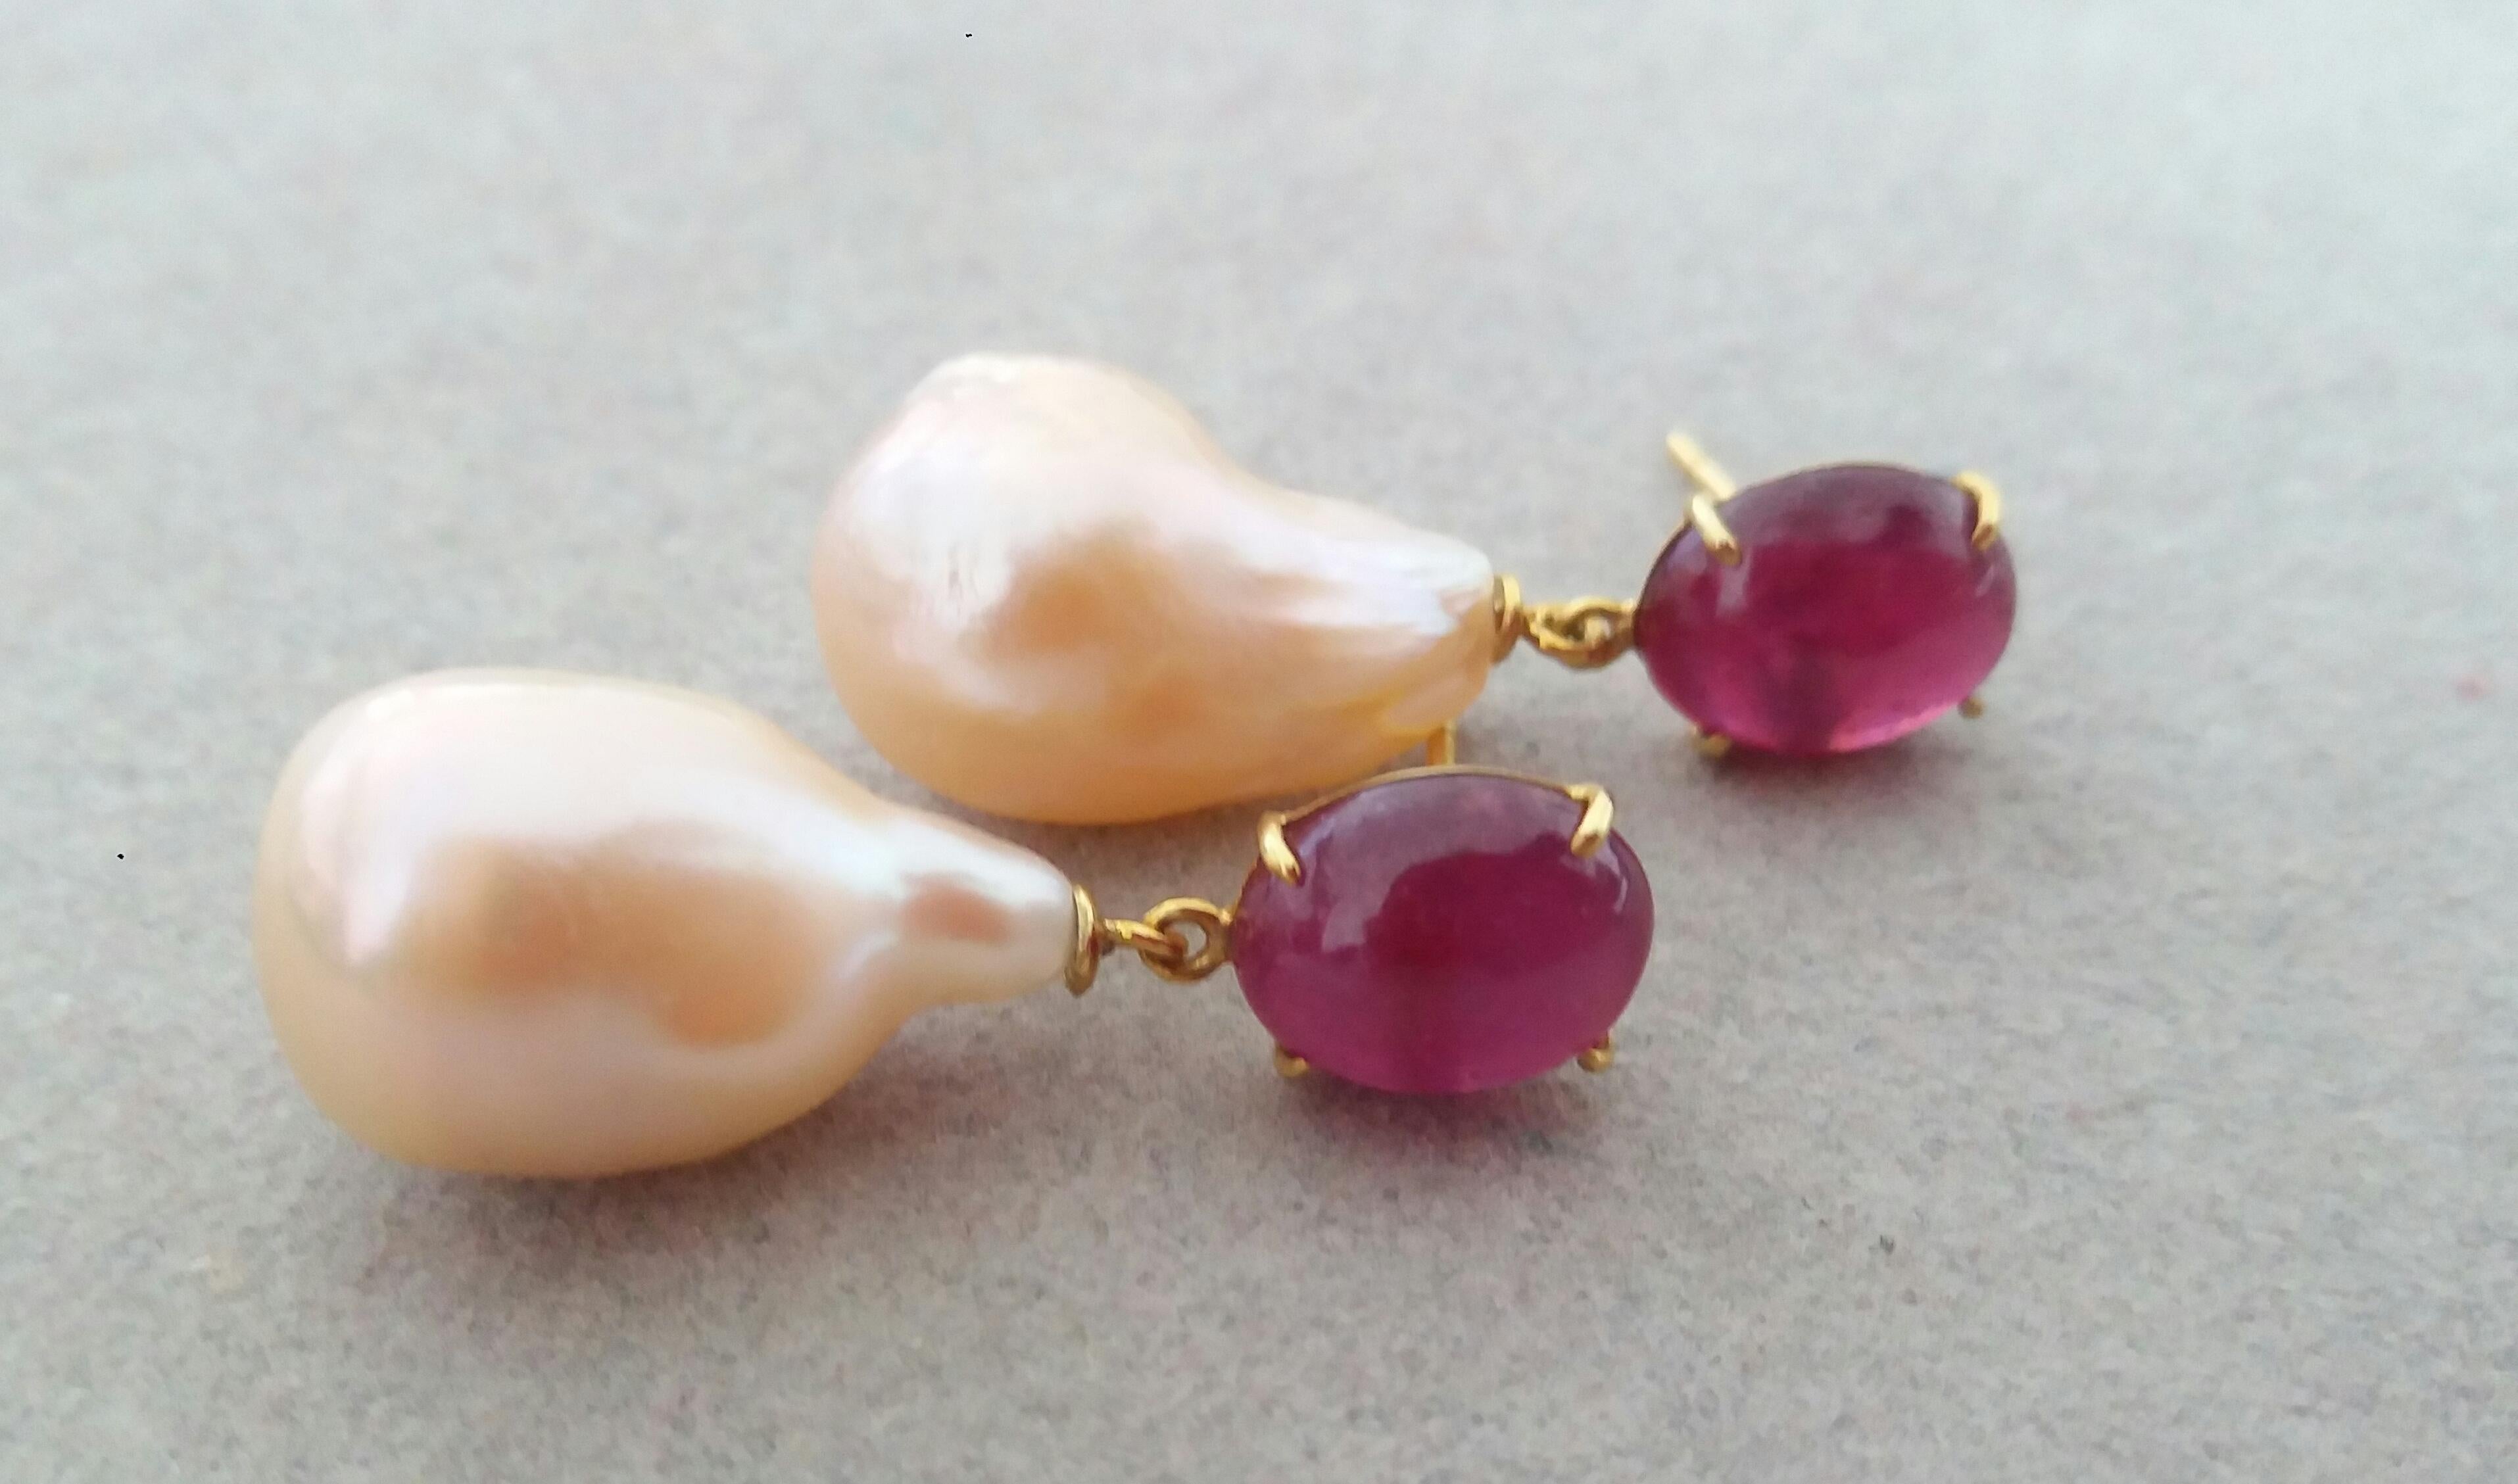 Big Size Pear Shape Cream Color Pearls Oval Ruby Cabochon 14 Karat Gold Earrings 4